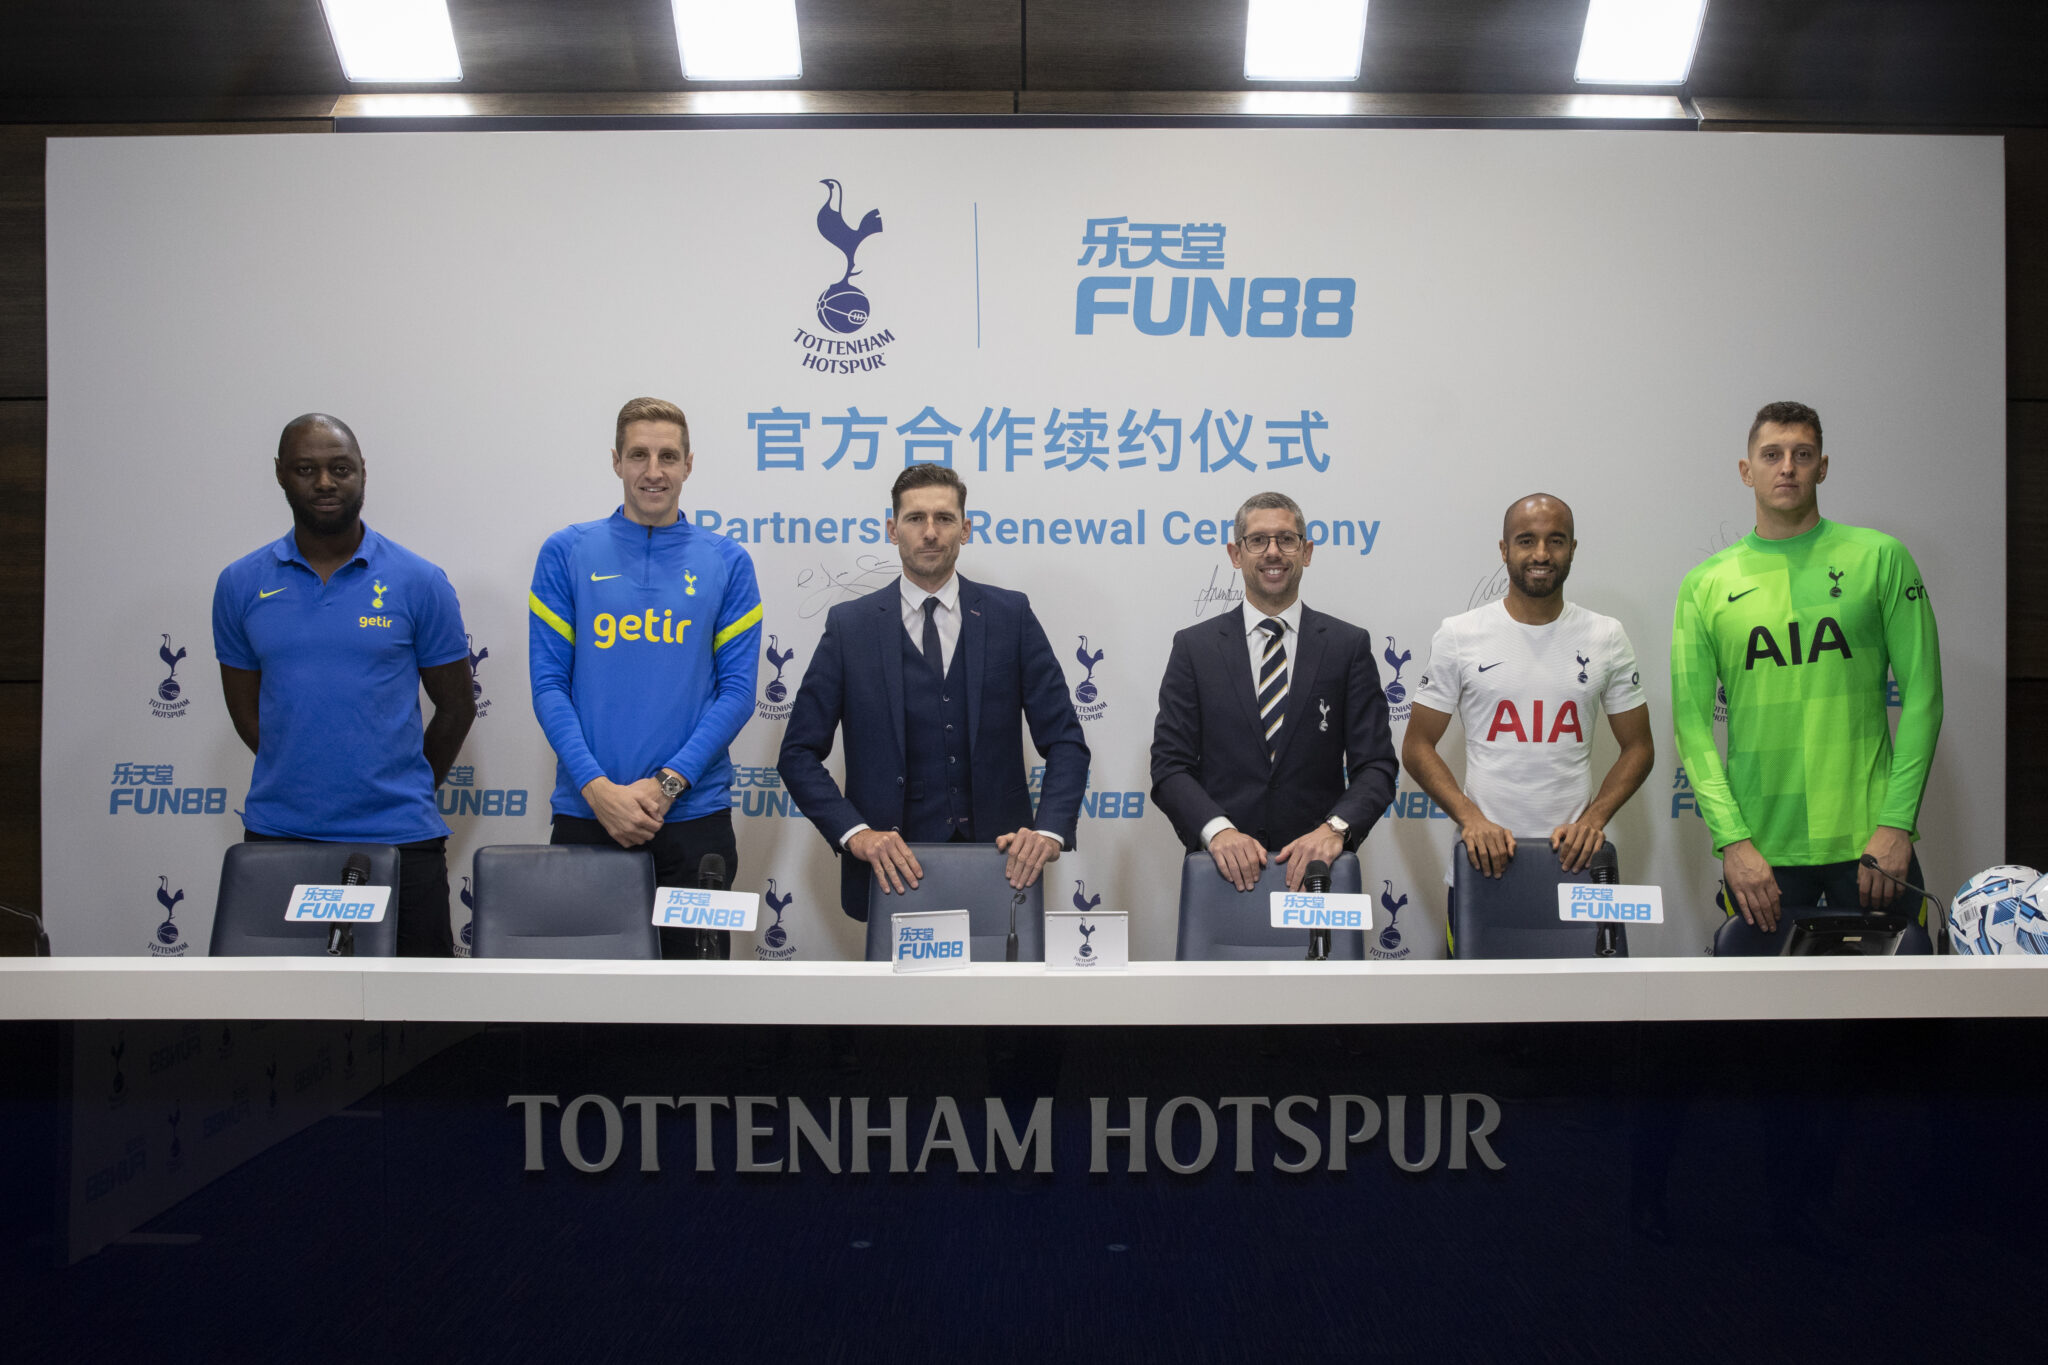 UK – FUN88 renews official betting partnership with Tottenham Hotspur for Asia and Latin America